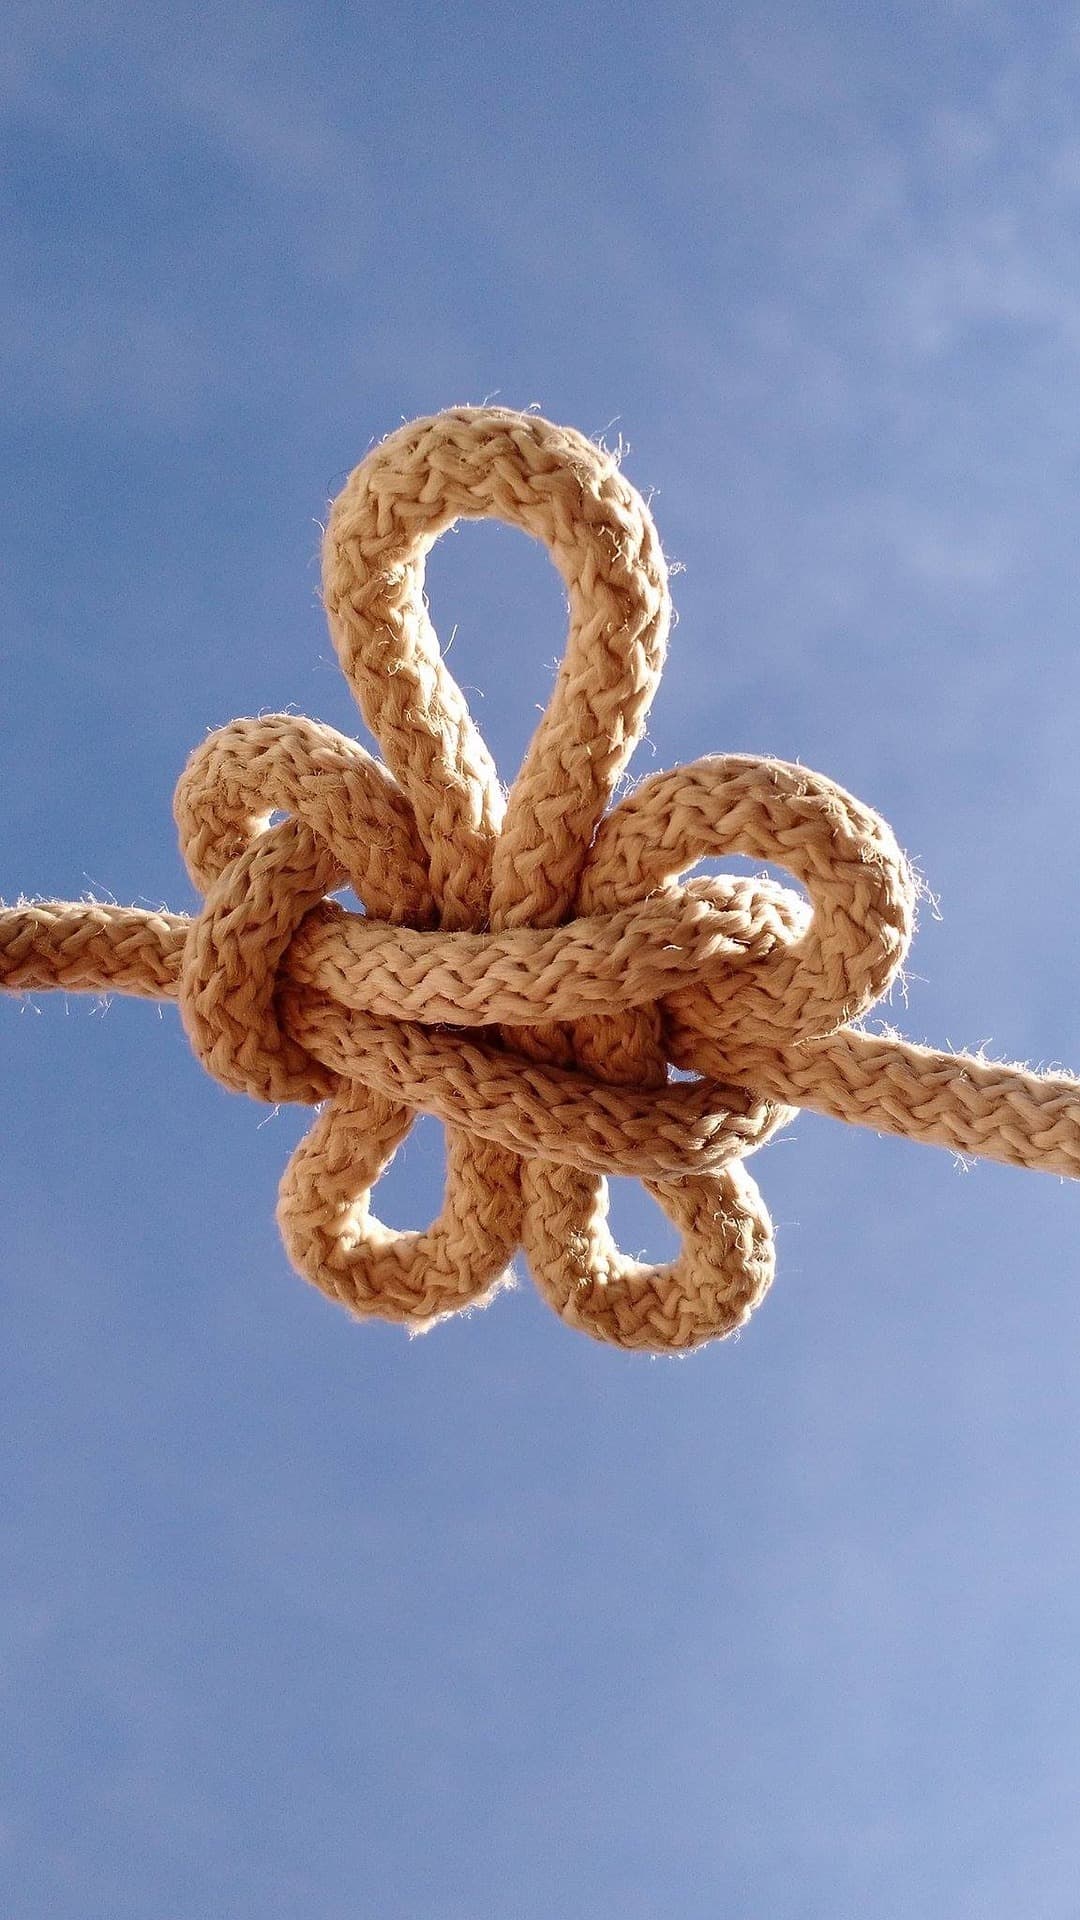 Flower style paracord knot